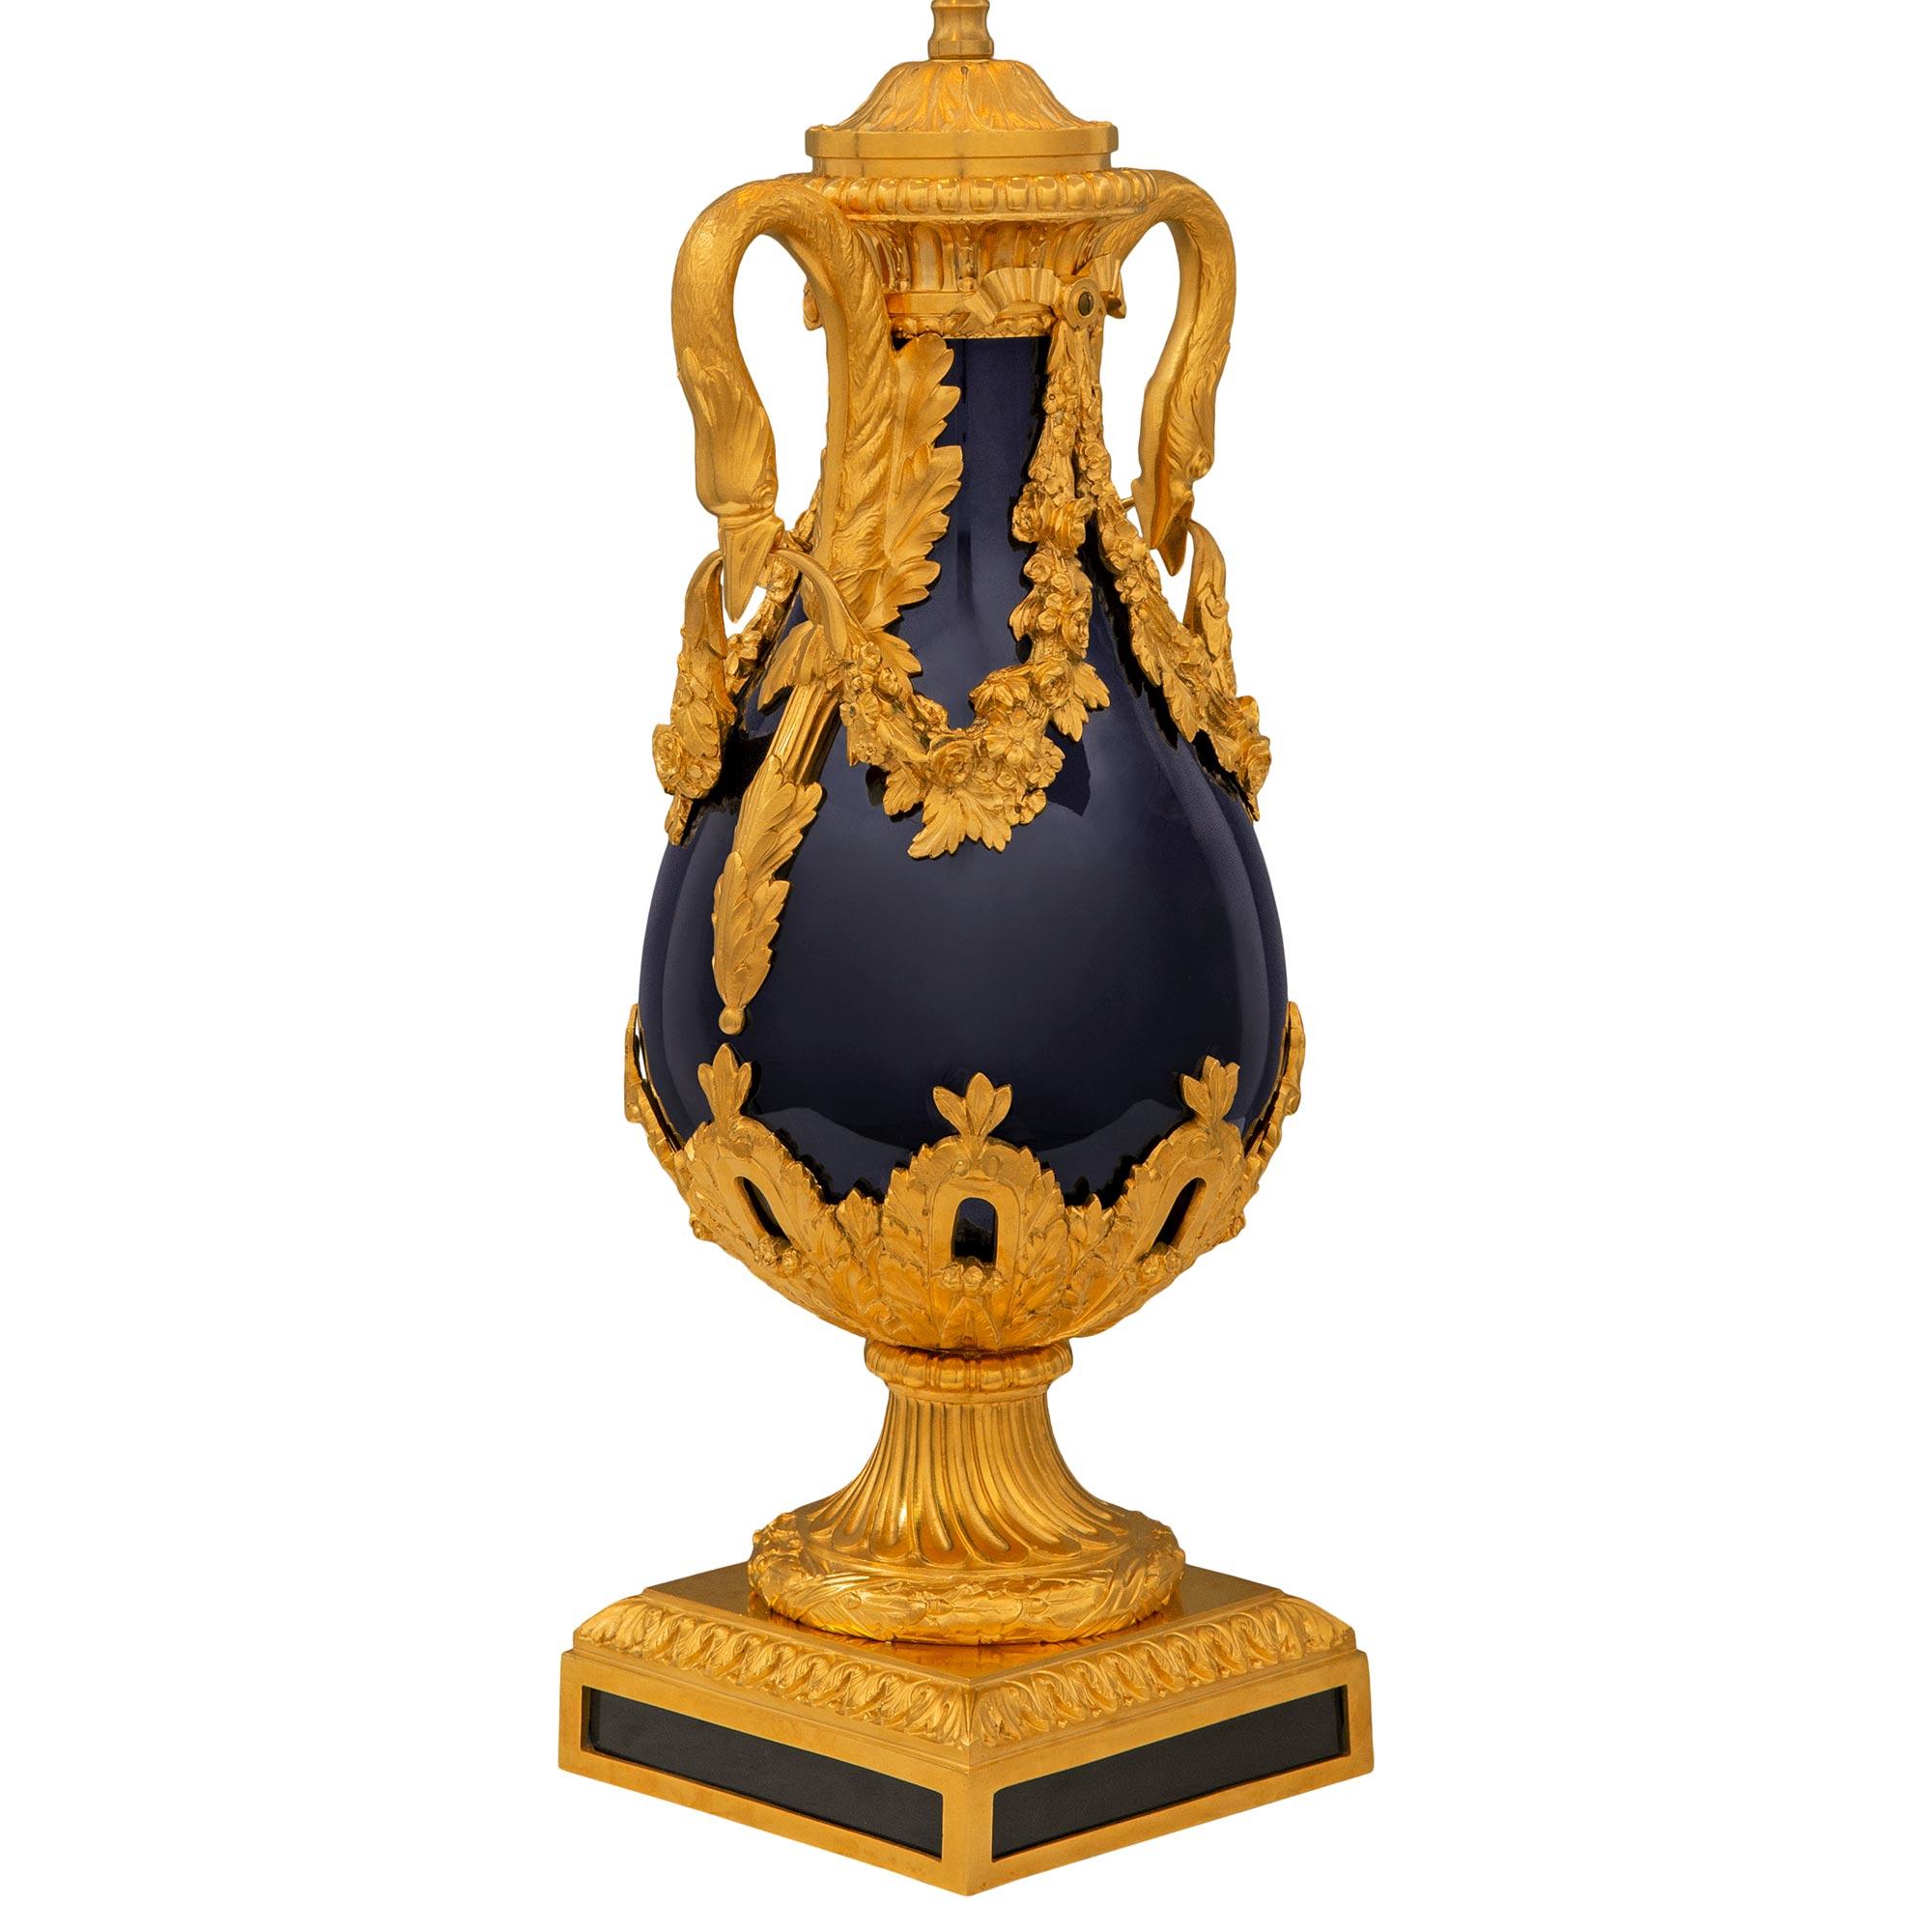 French 19th century Louis XVI st. cobalt blue Sèvres porcelain and Ormolu lamp In Good Condition For Sale In West Palm Beach, FL